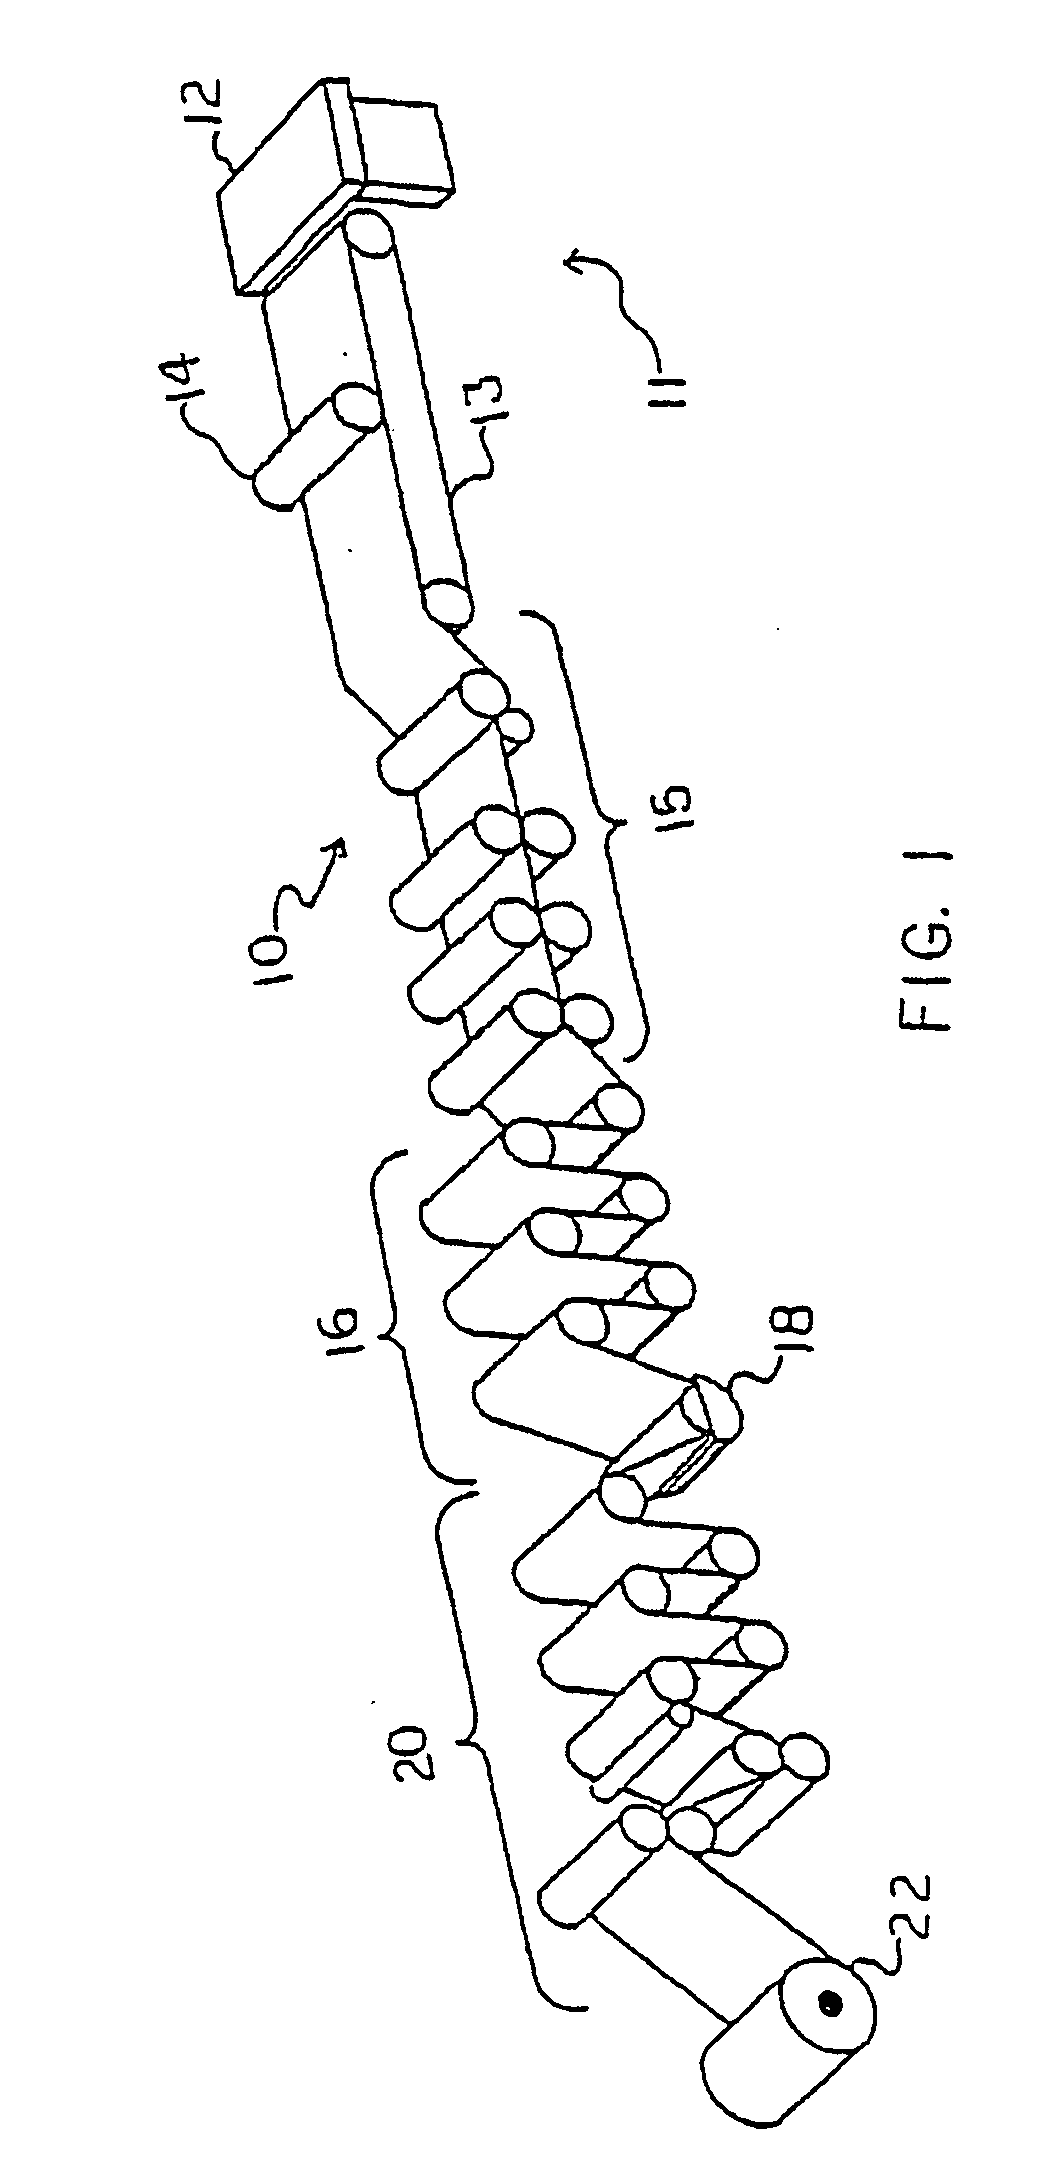 Coating compositions comprising alkyl ketene dimers and alkyl succinic anhydrides for use in paper making